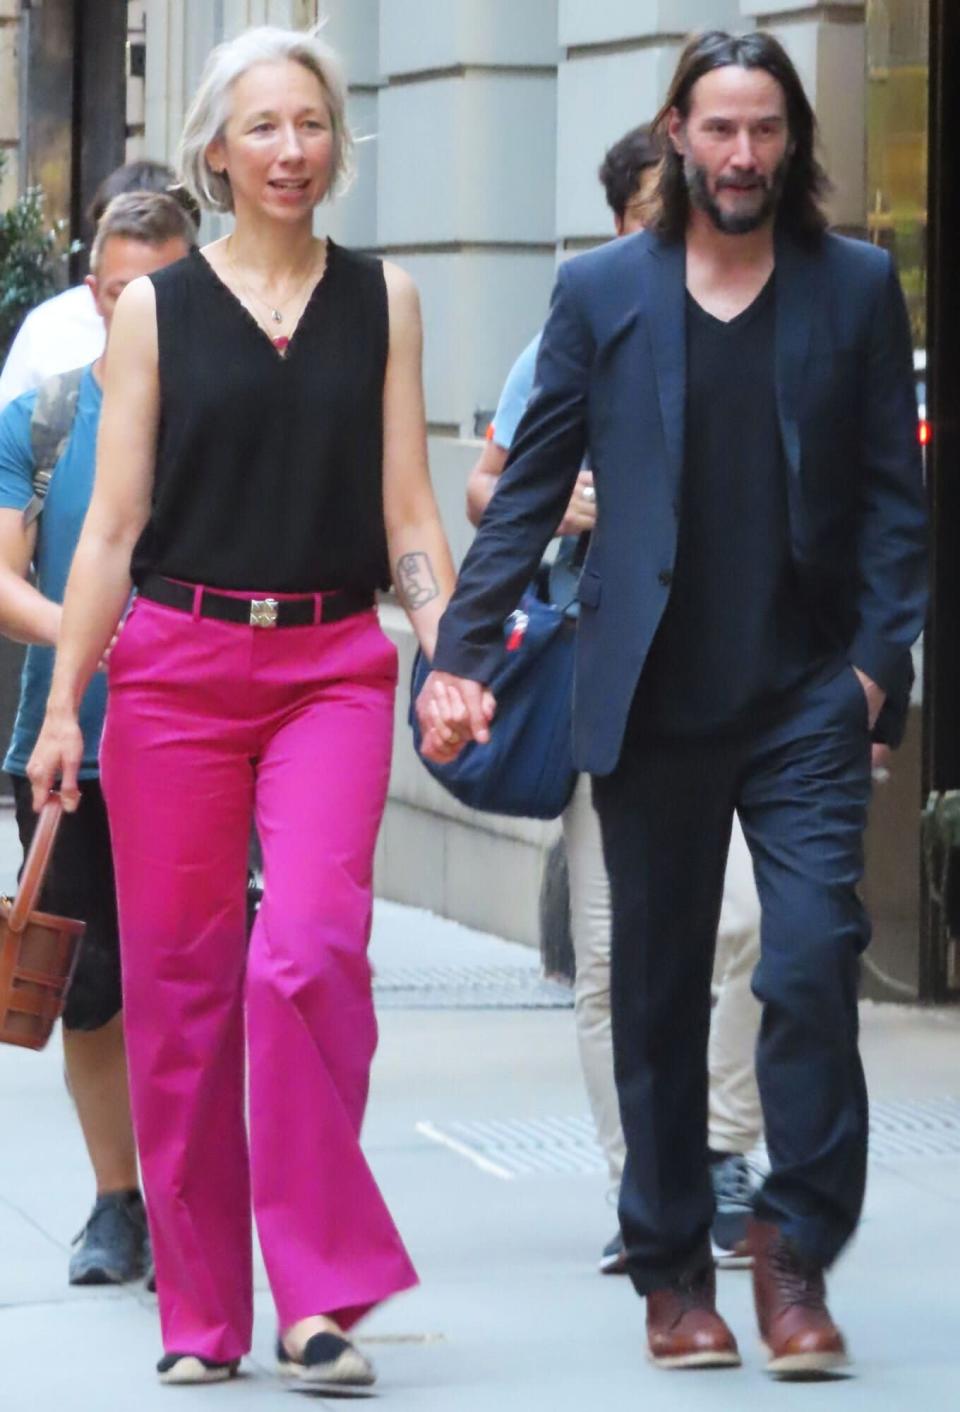 EXCLUSIVE: Keanu Reeves and Alexandra Grant spotted in a rare public outing